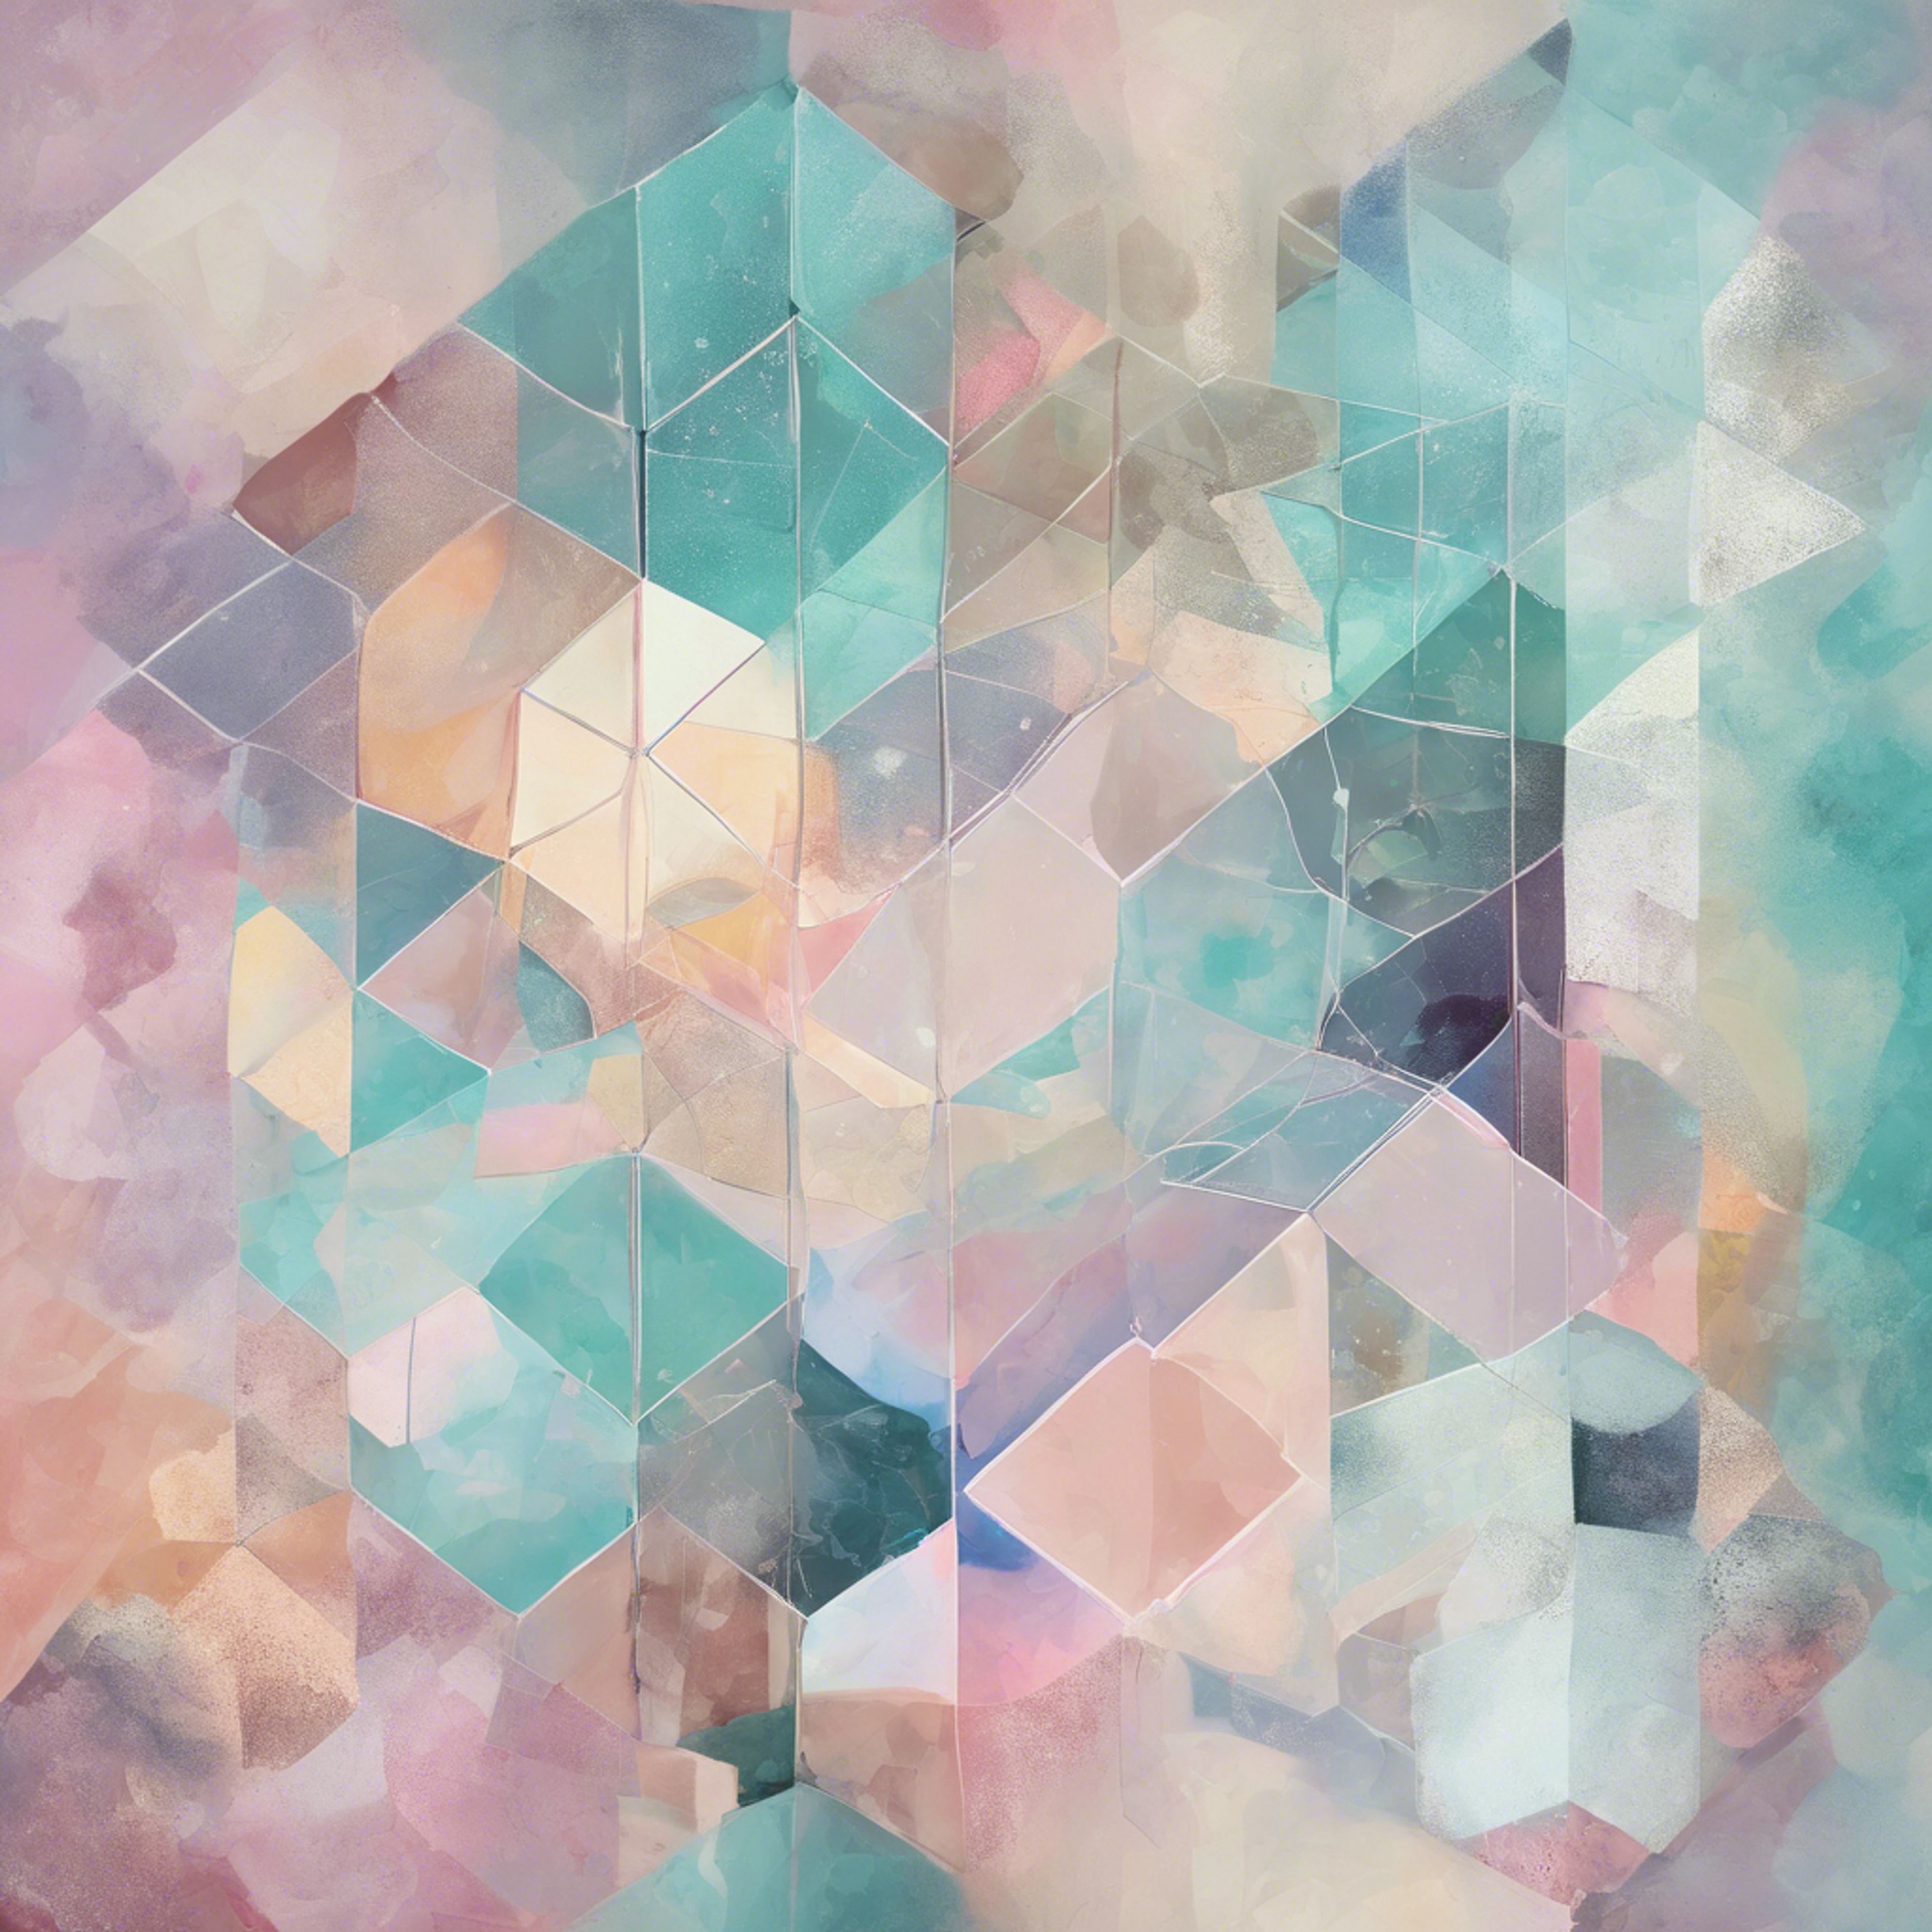 A cool pastel colored abstract painting emphasizing geometric patterns. Tapeta na zeď[4610bdb5de564f779c91]